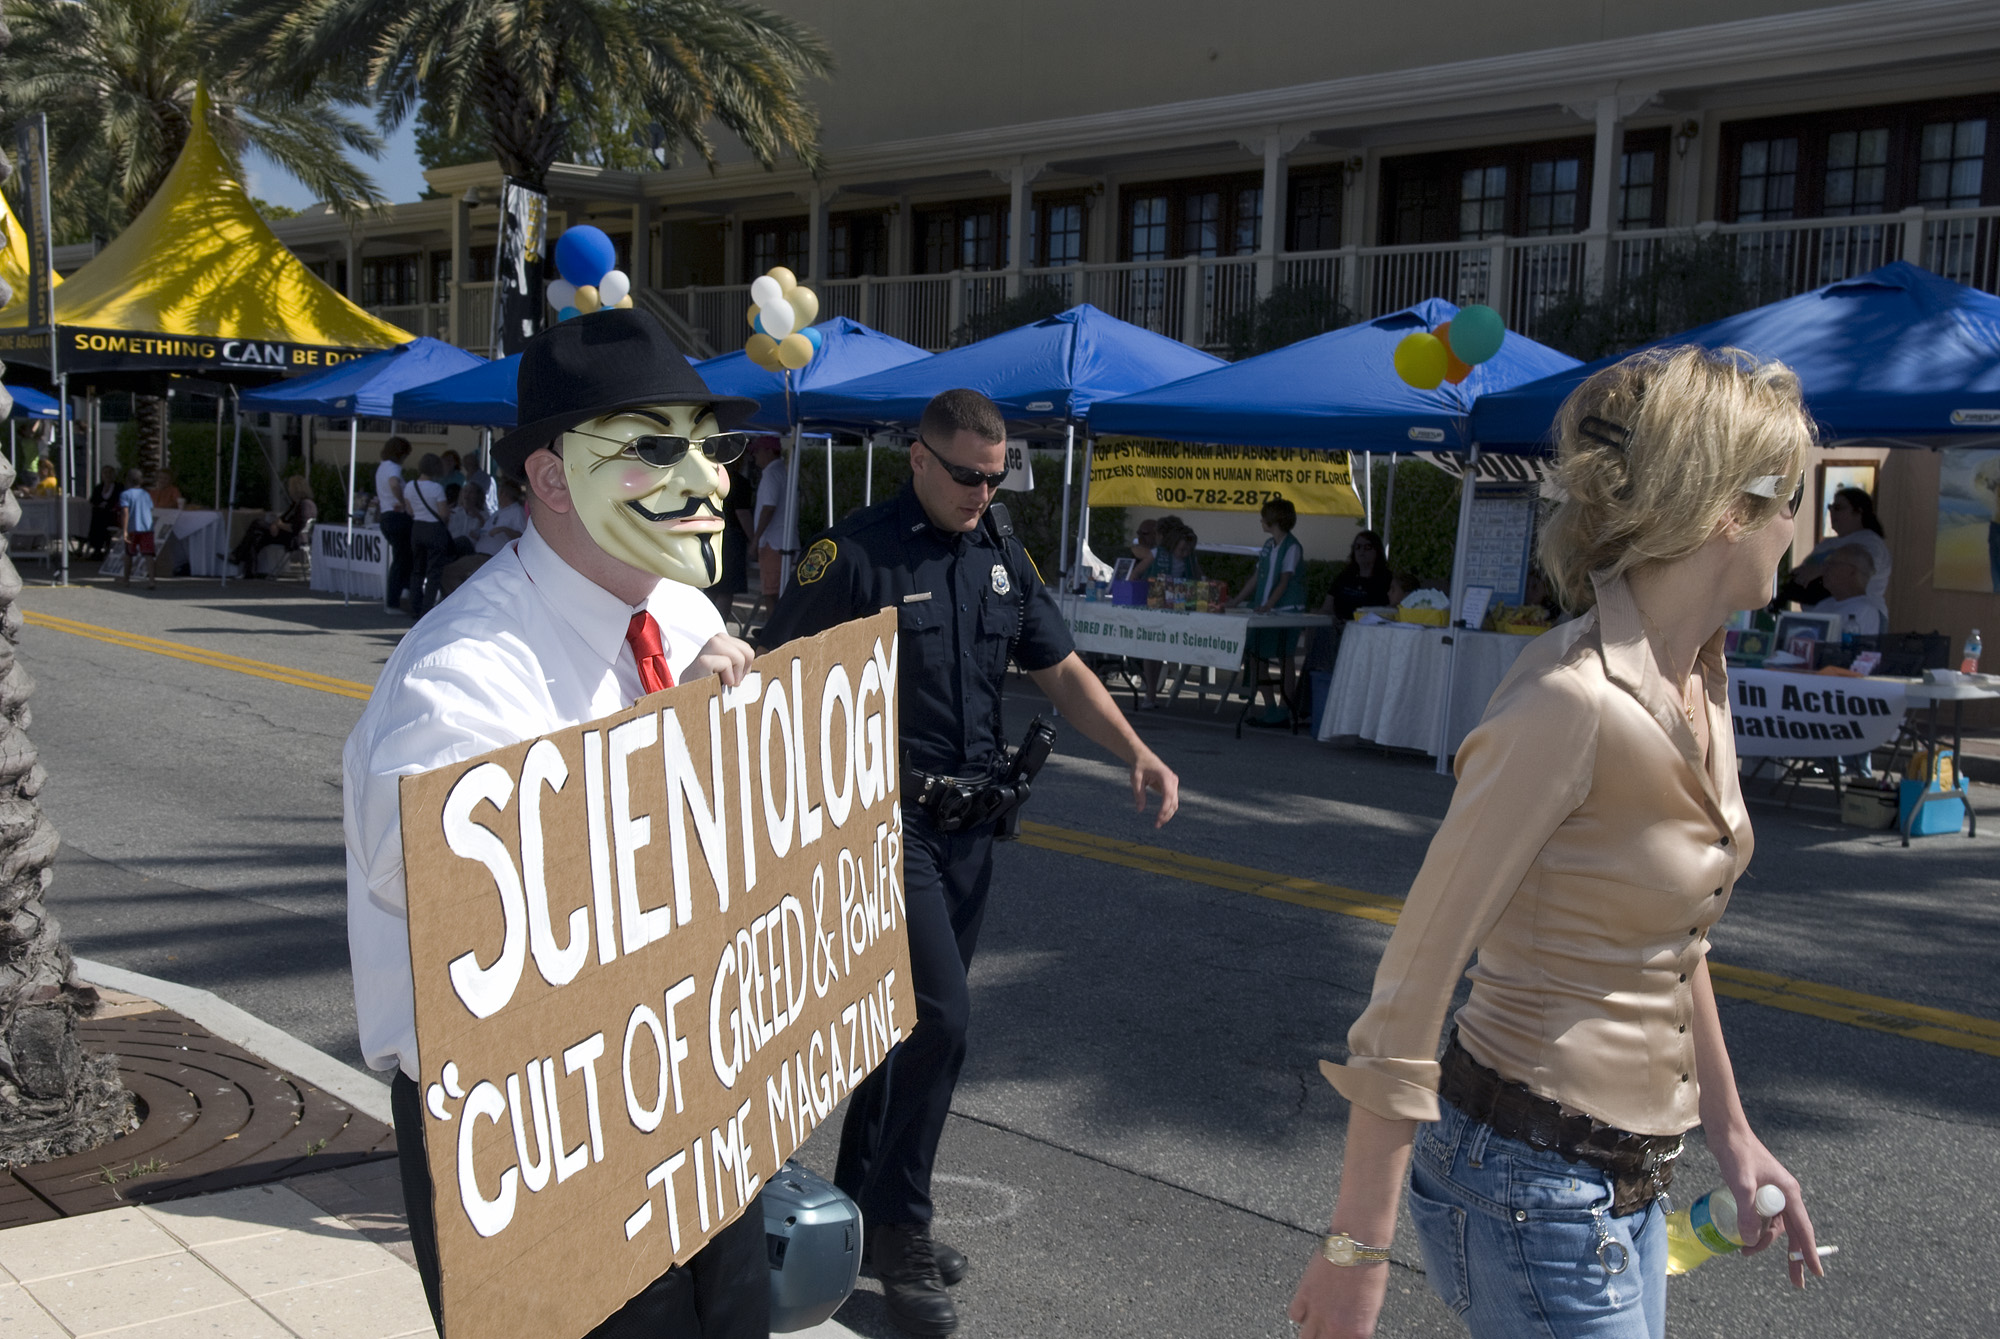 Scientology protest group celebrates founder's birthday worldwide -  Wikinews, the free news source